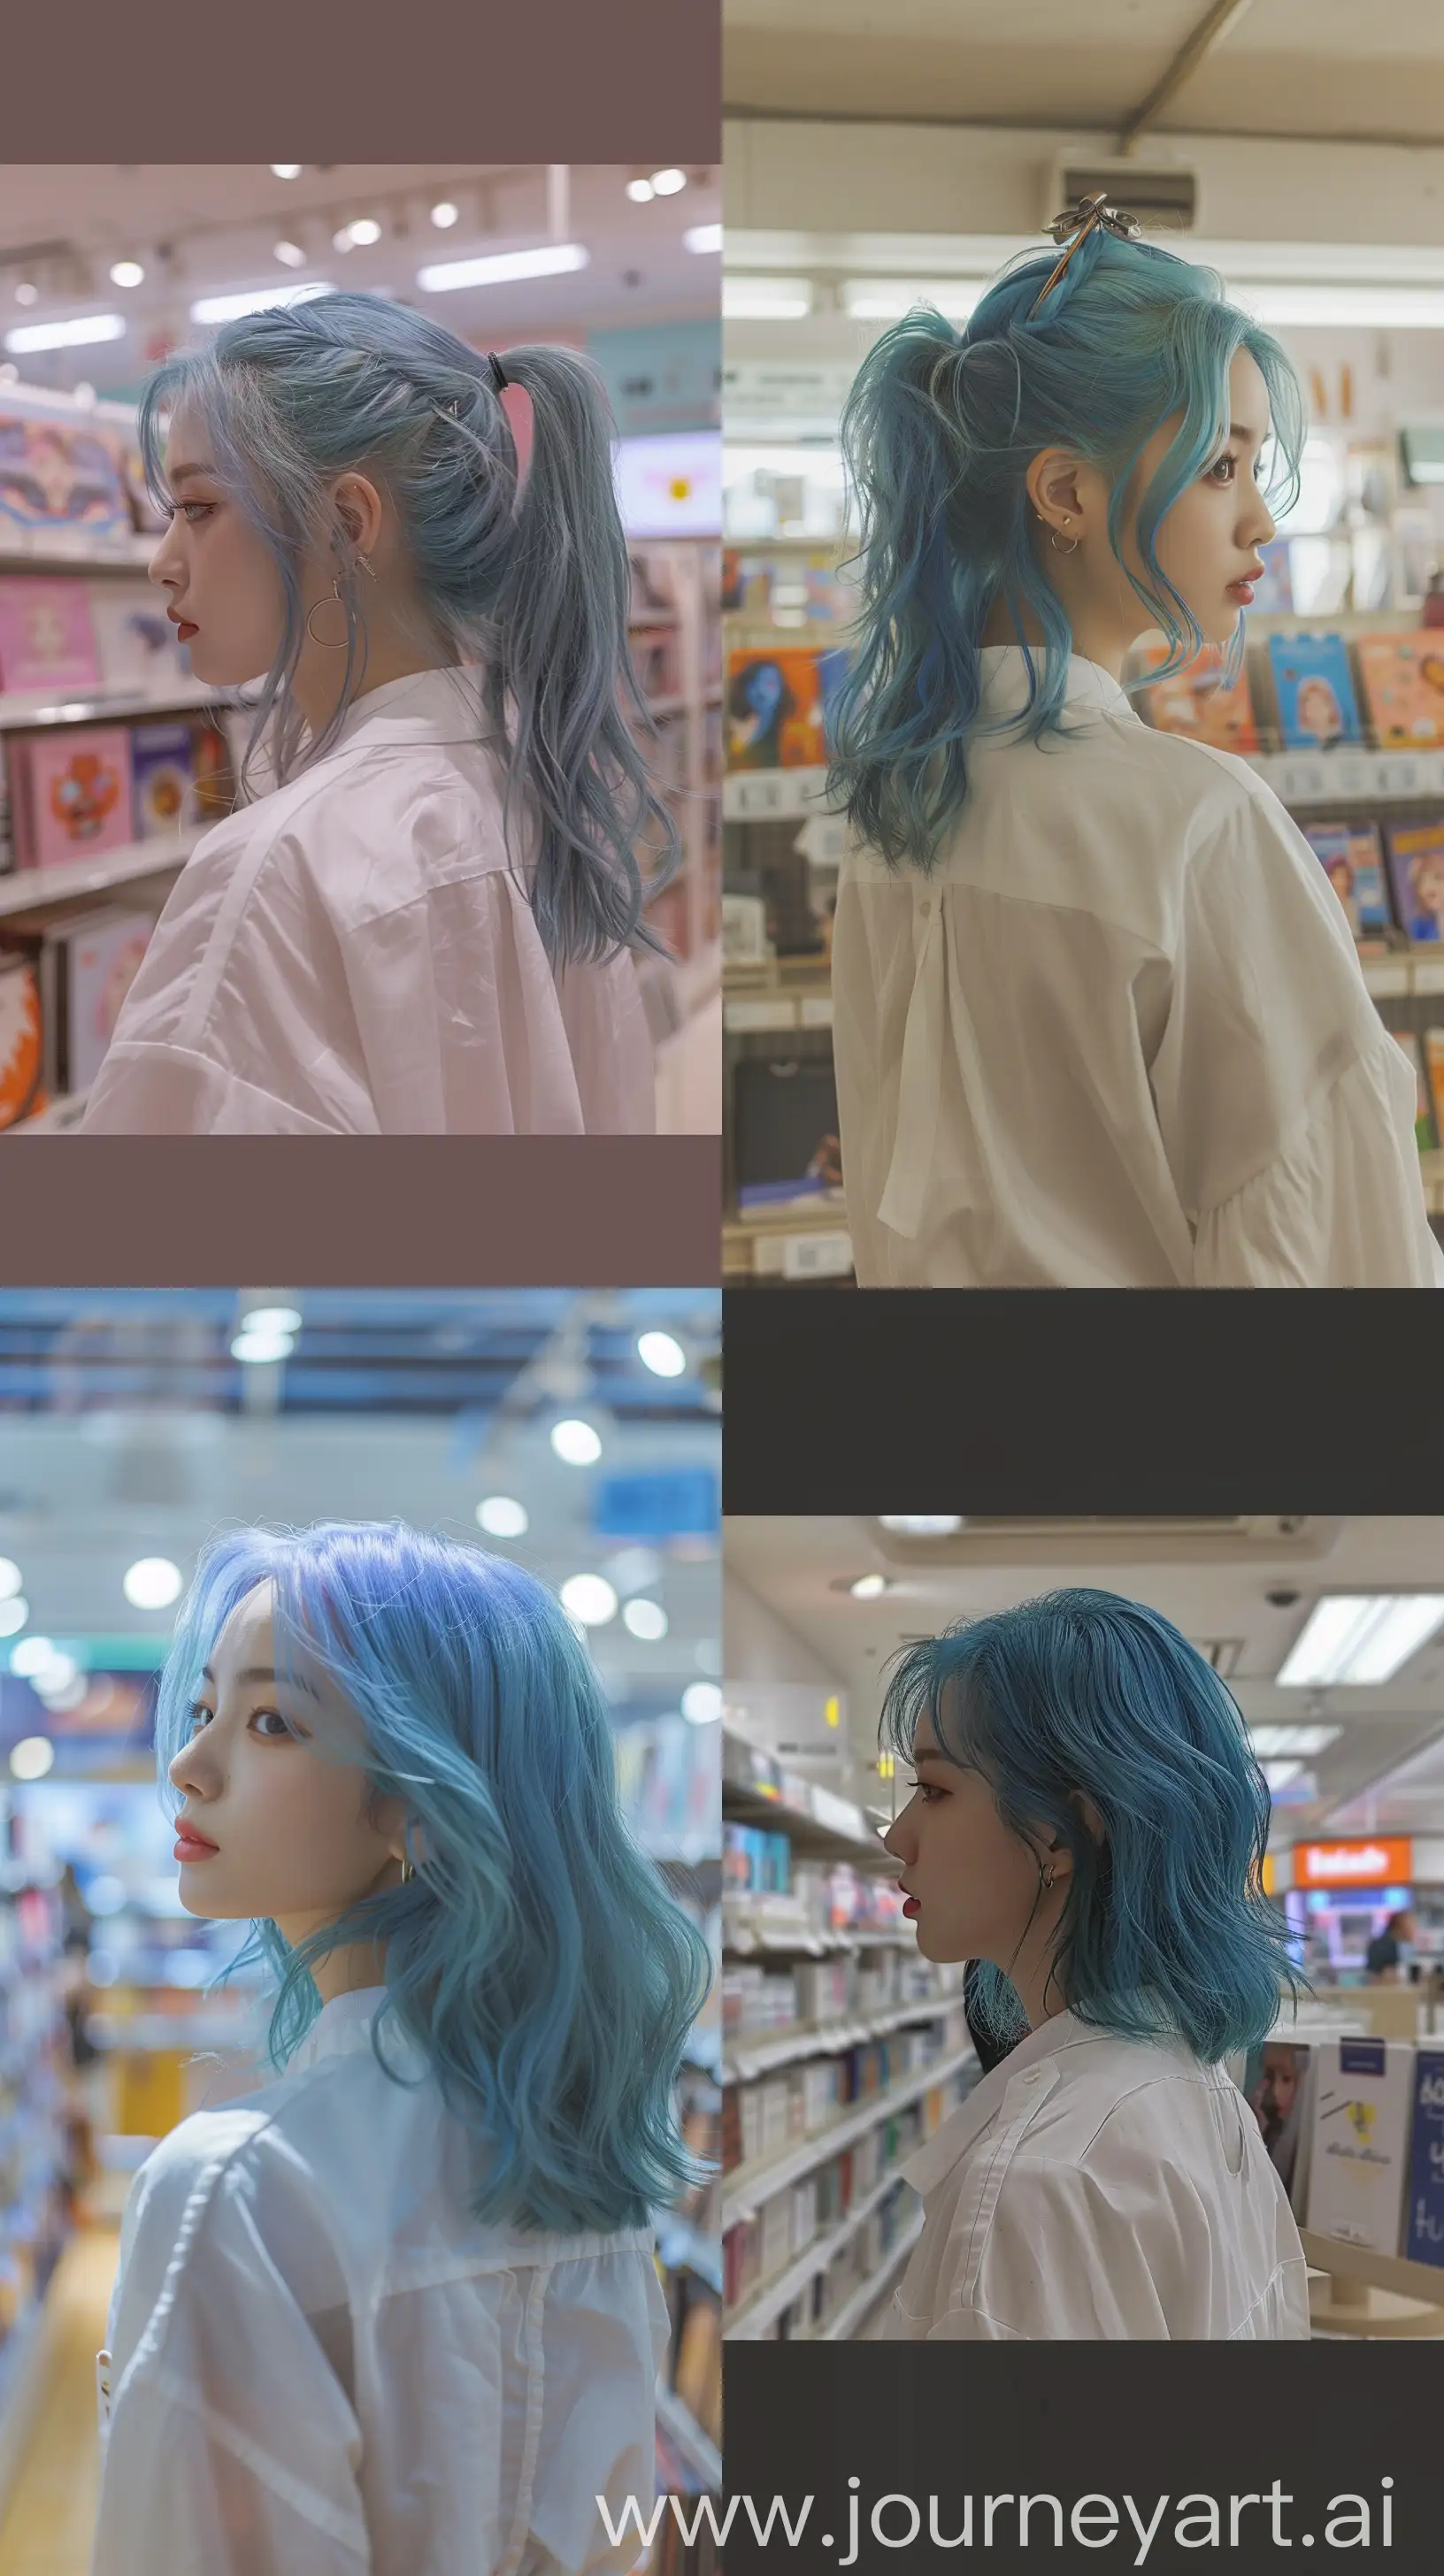 Jennie-from-Blackpink-with-Blue-Wolfcut-Hair-in-White-Shirt-Inside-Album-Store